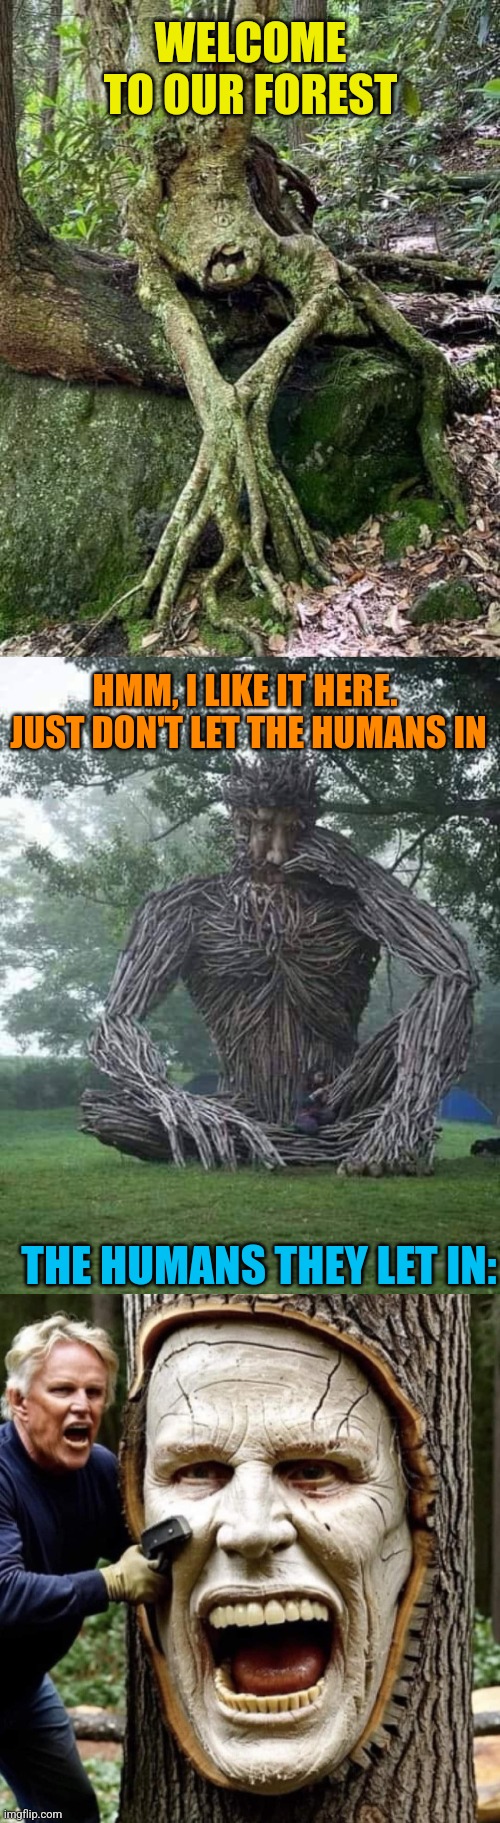 Run, Forest, run! | WELCOME TO OUR FOREST; HMM, I LIKE IT HERE.  JUST DON'T LET THE HUMANS IN; THE HUMANS THEY LET IN: | image tagged in trees,talking,forest,groot,gary busey,tree carving | made w/ Imgflip meme maker